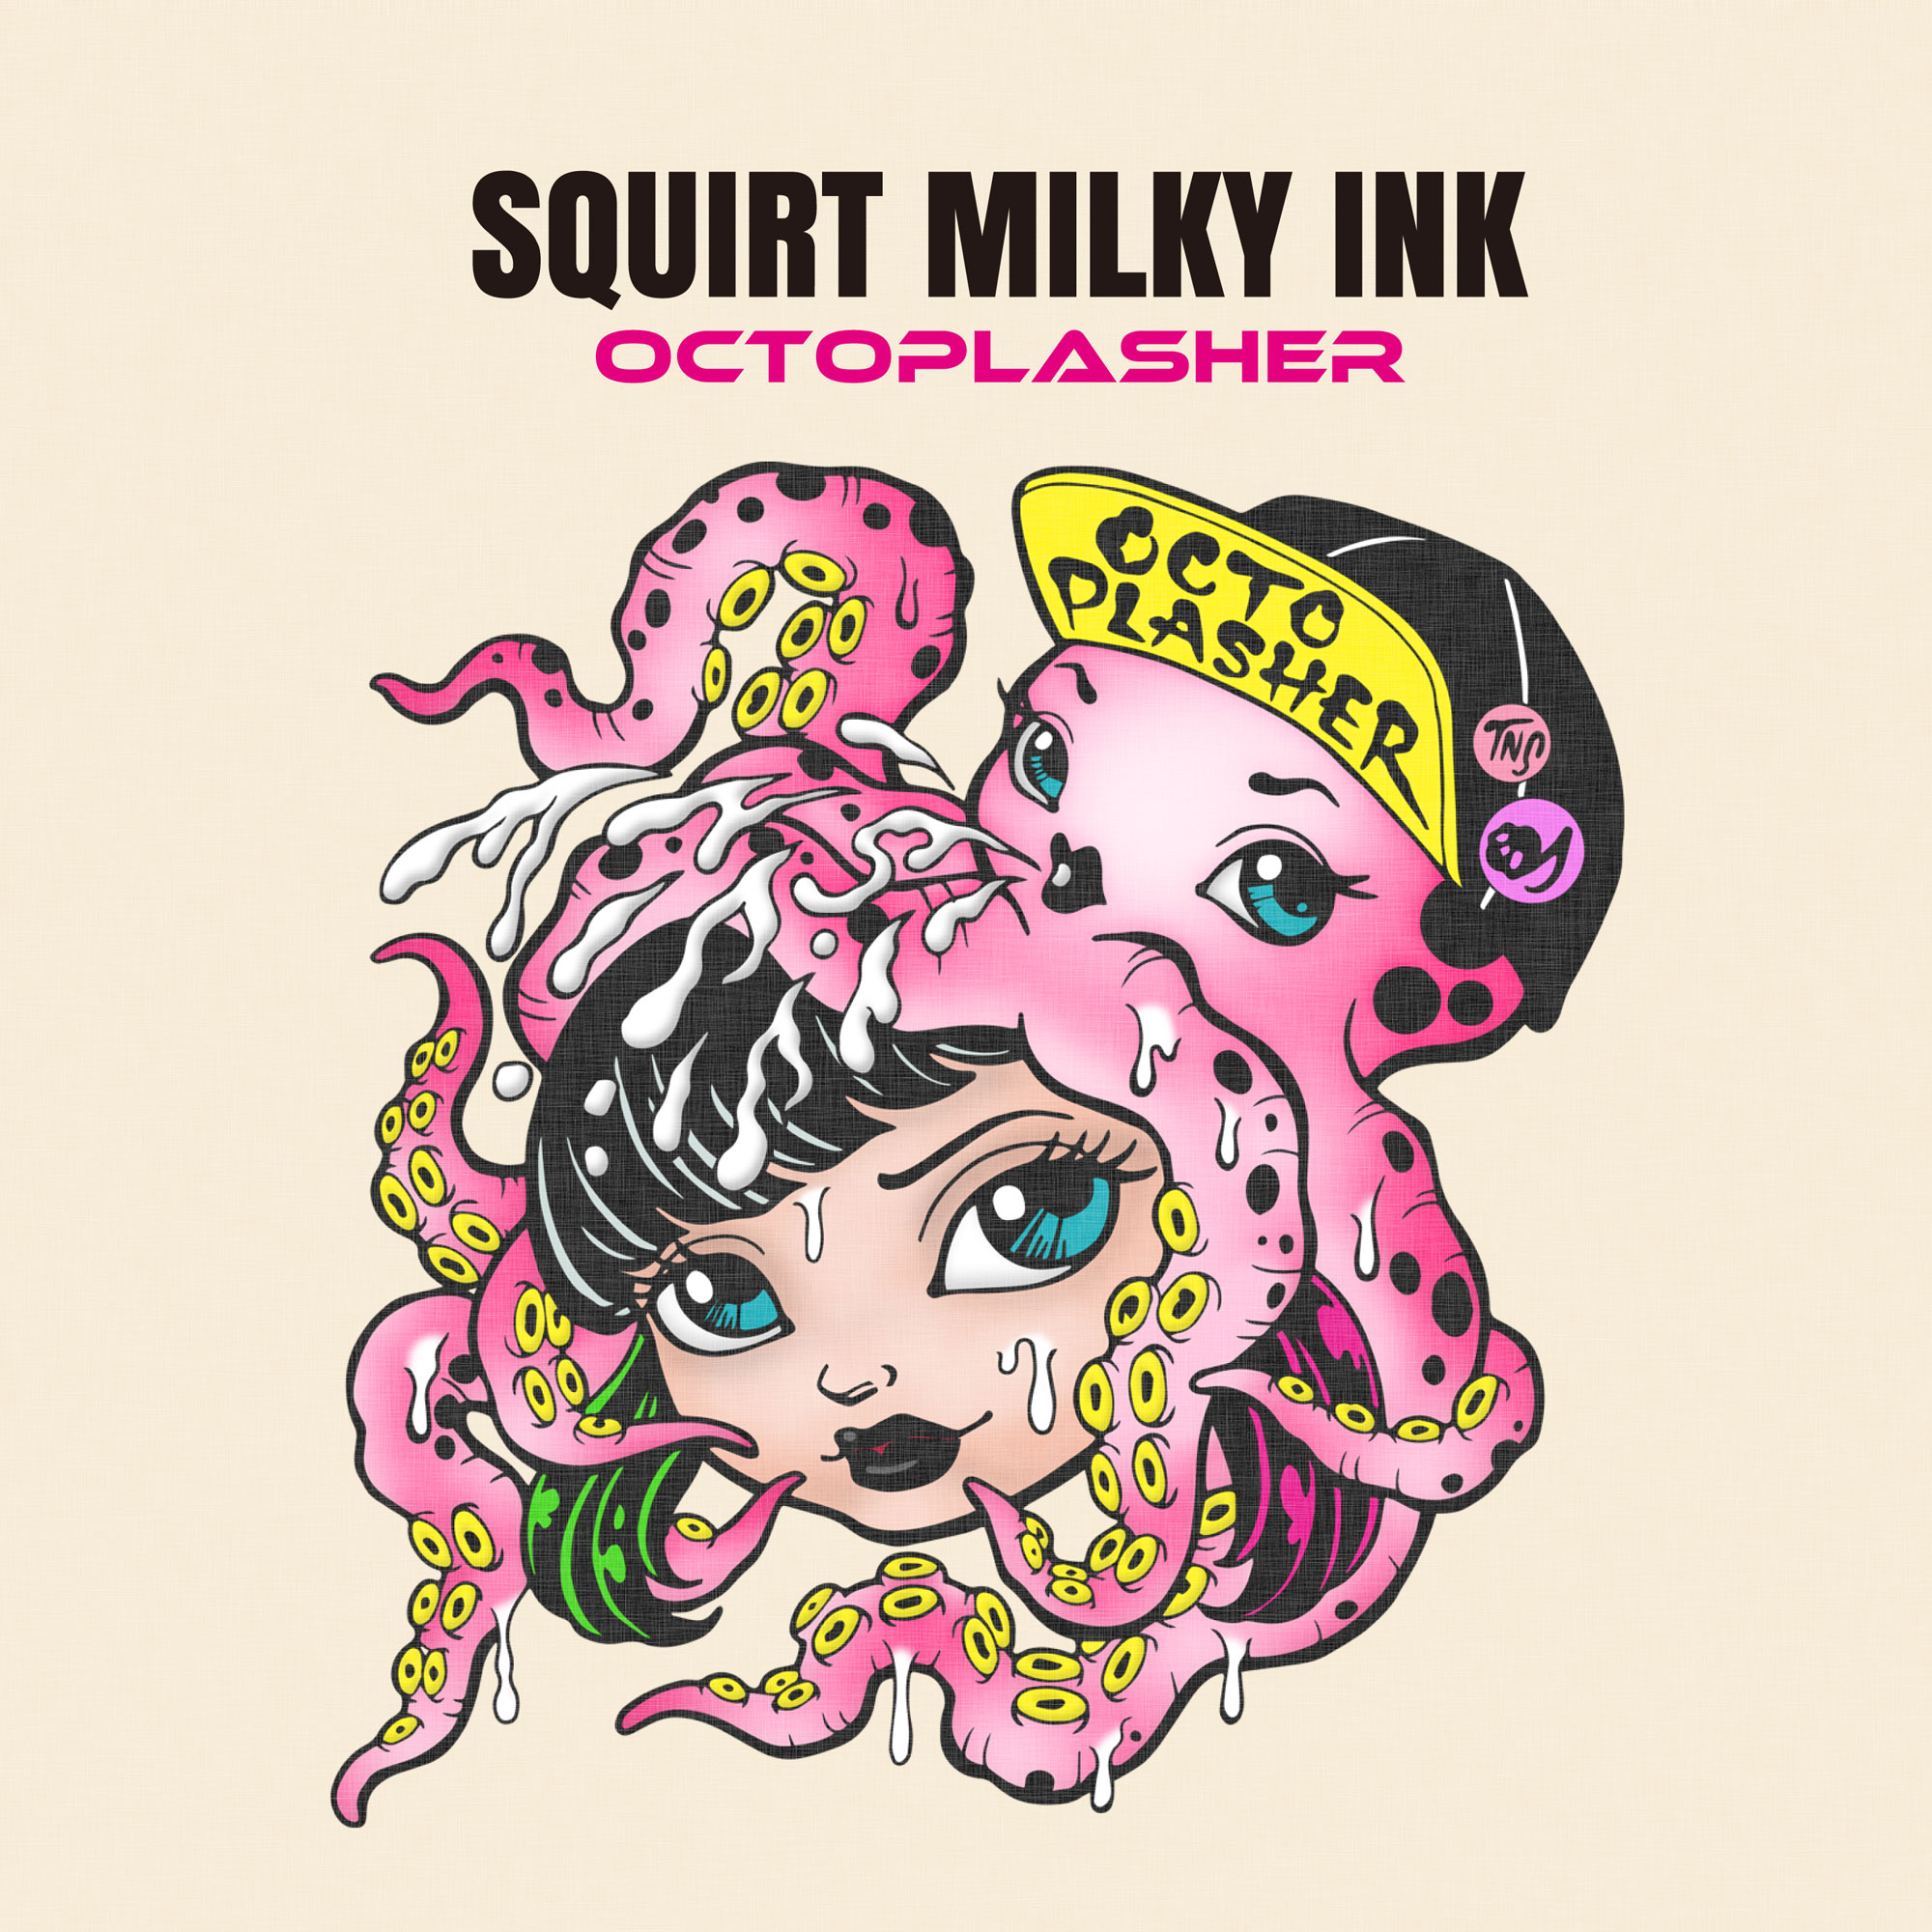 SQUIRT MILKY INK